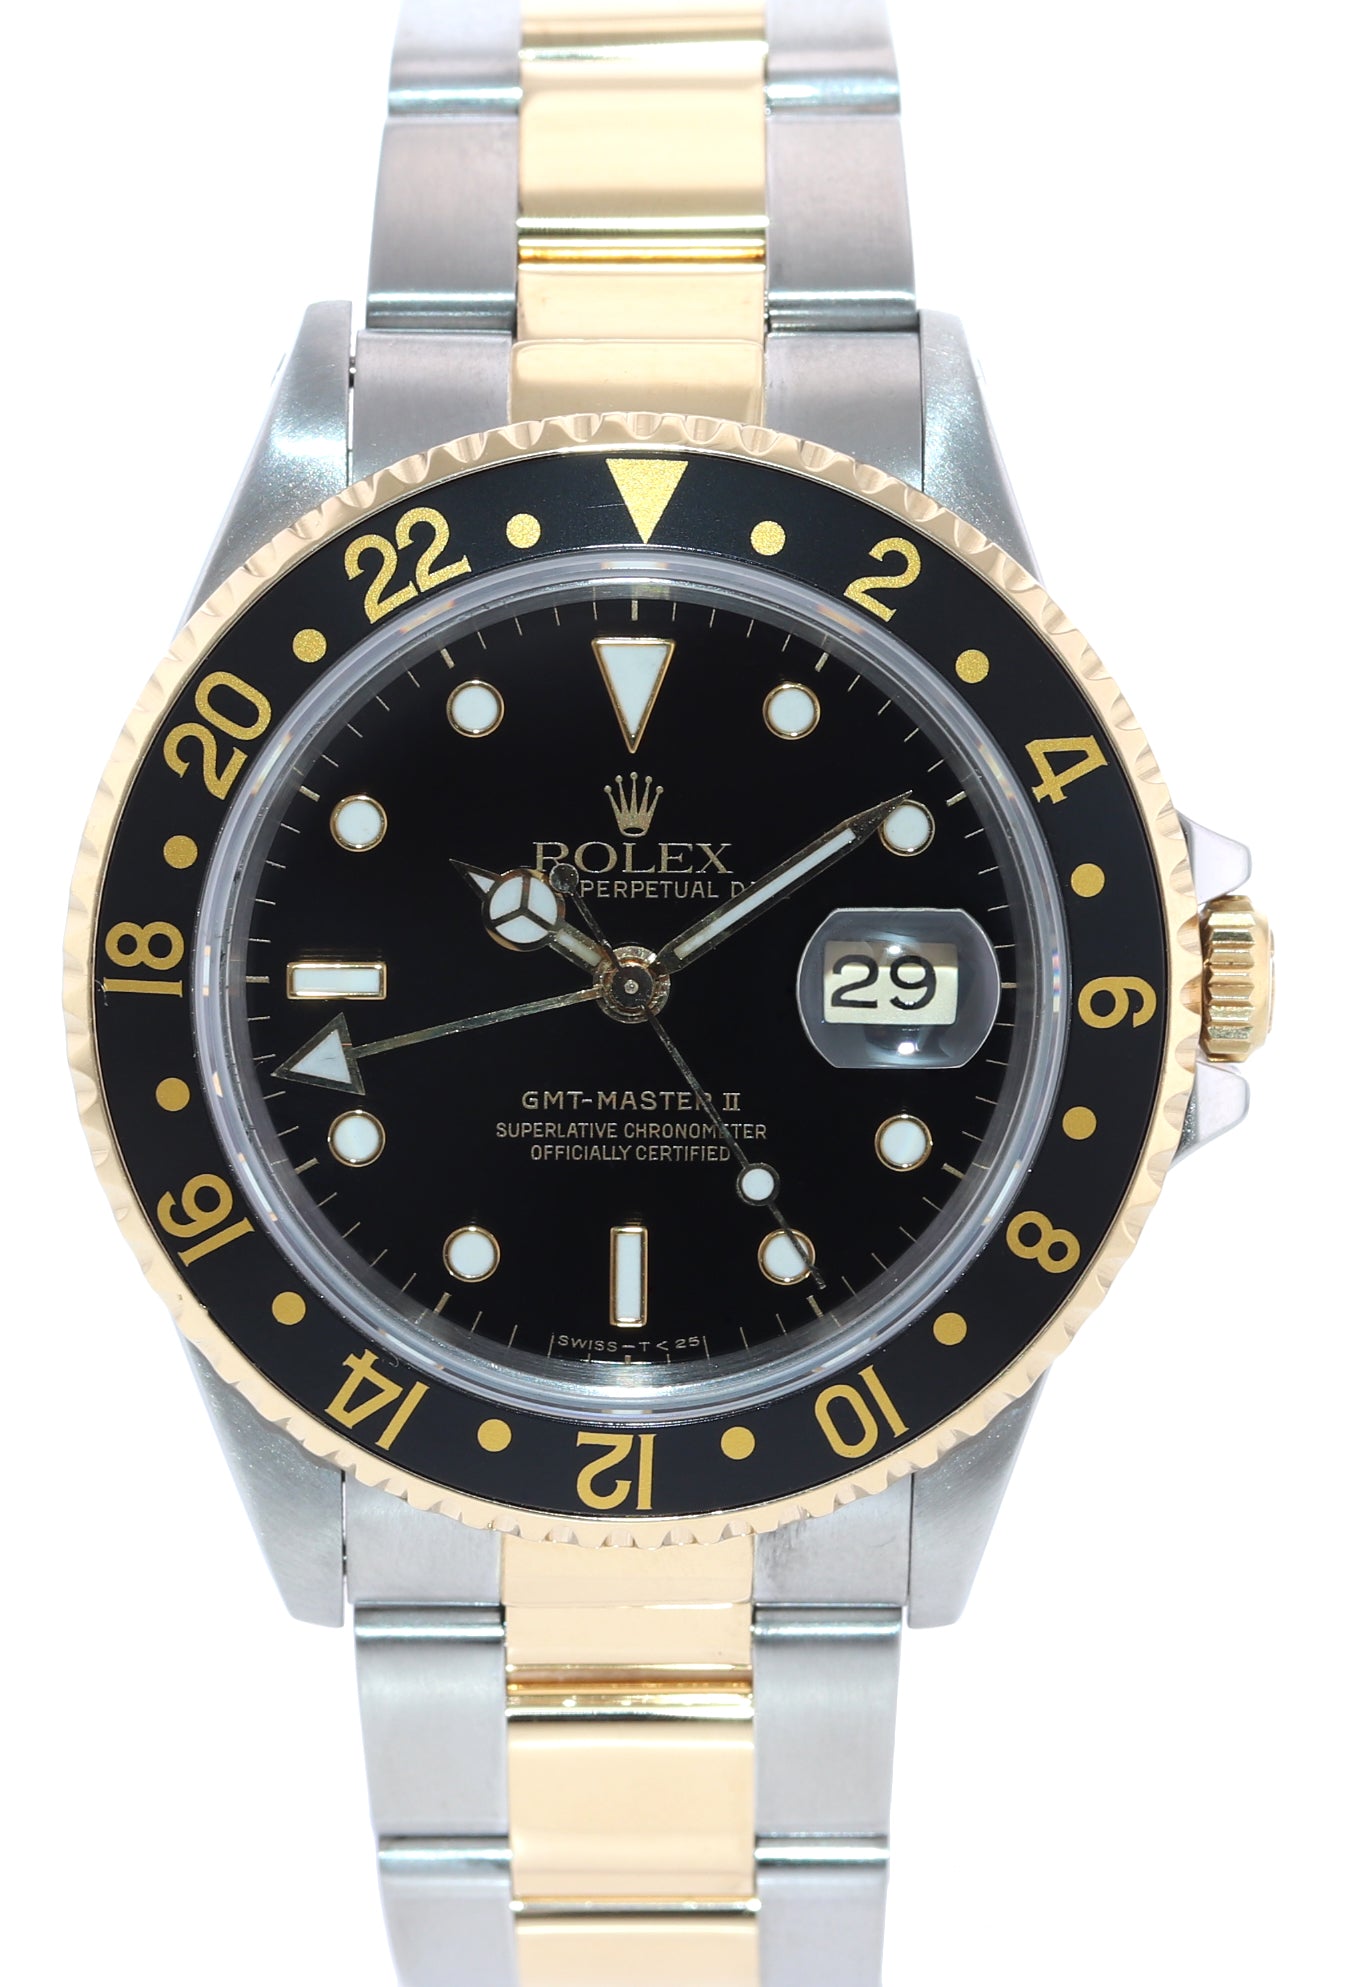 Papers Rolex GMT-Master II 16713 Two-Tone Gold Steel Date Black 40mm Watch